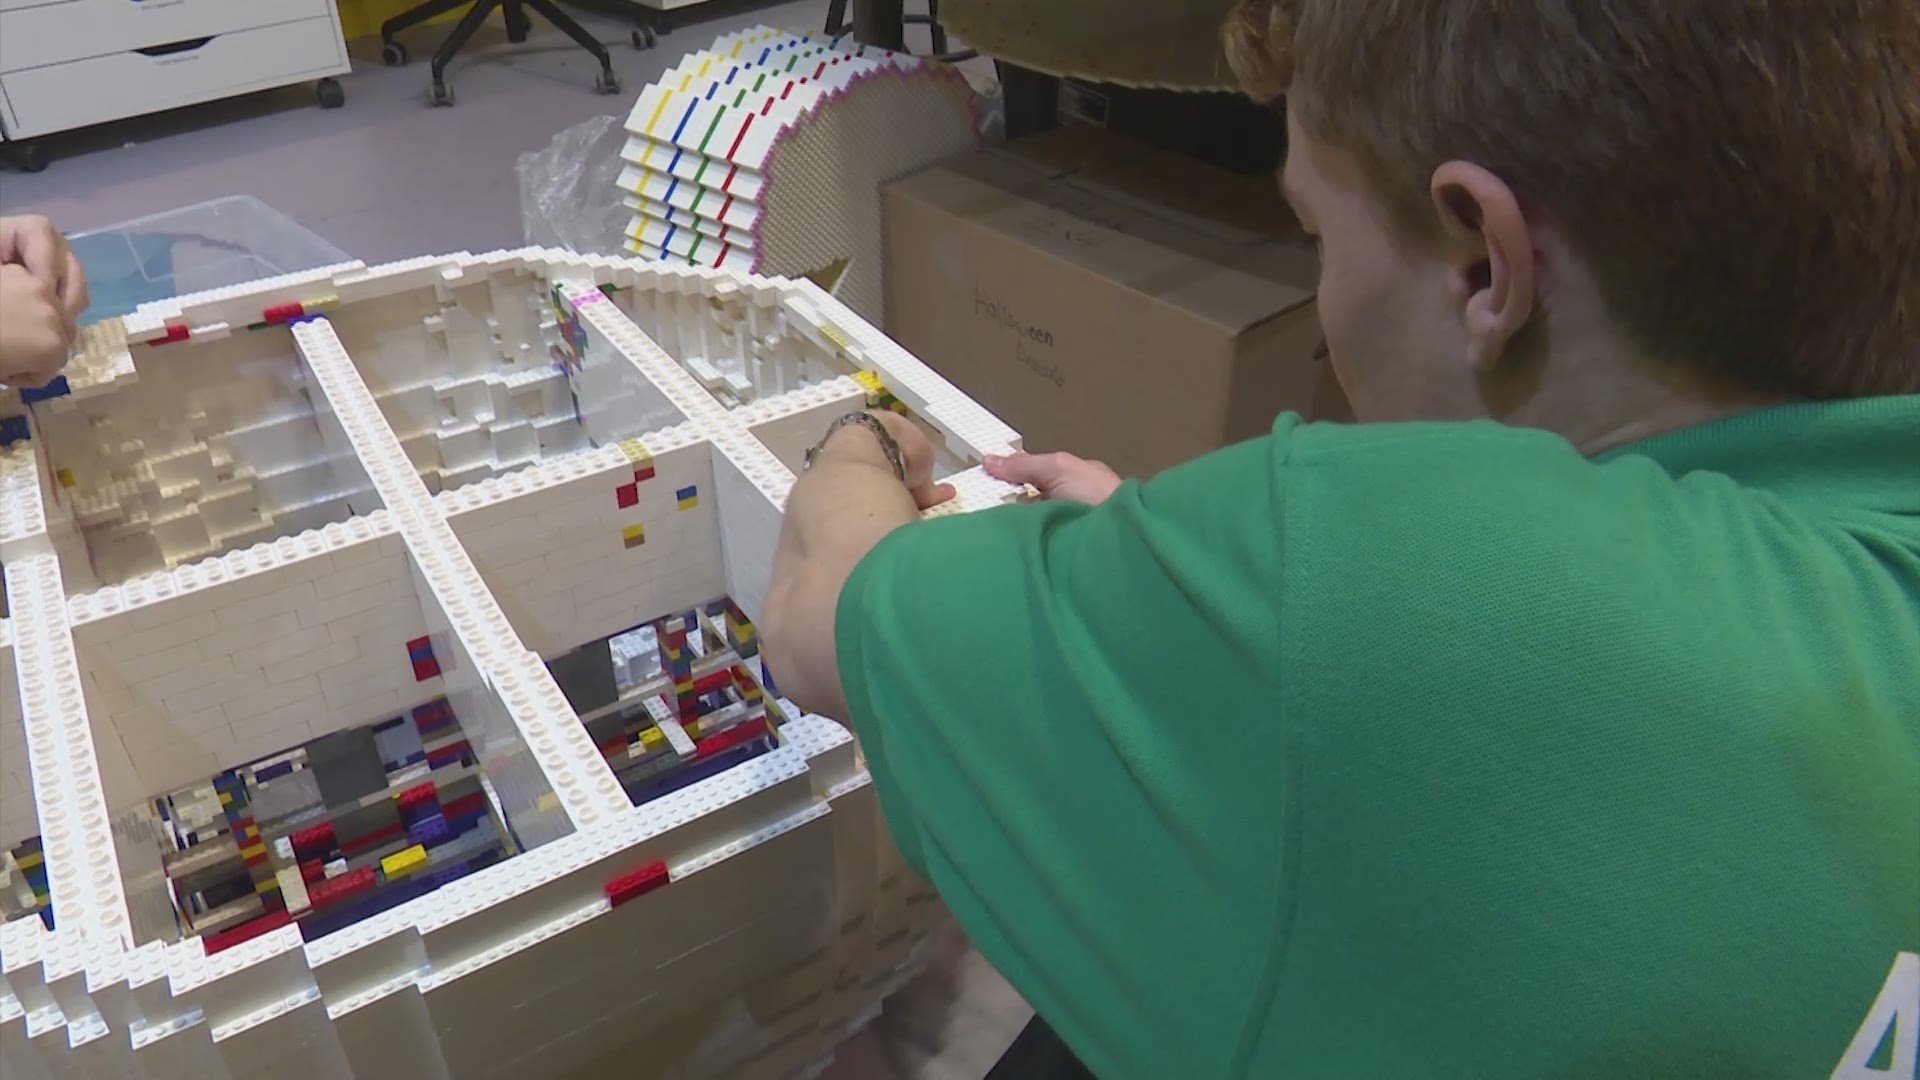 Thaddeus Bennett is the new Master Builder at LEGOLAND Discovery Center in Grapevine. It's a career move he never expected but has been preparing for his entire life